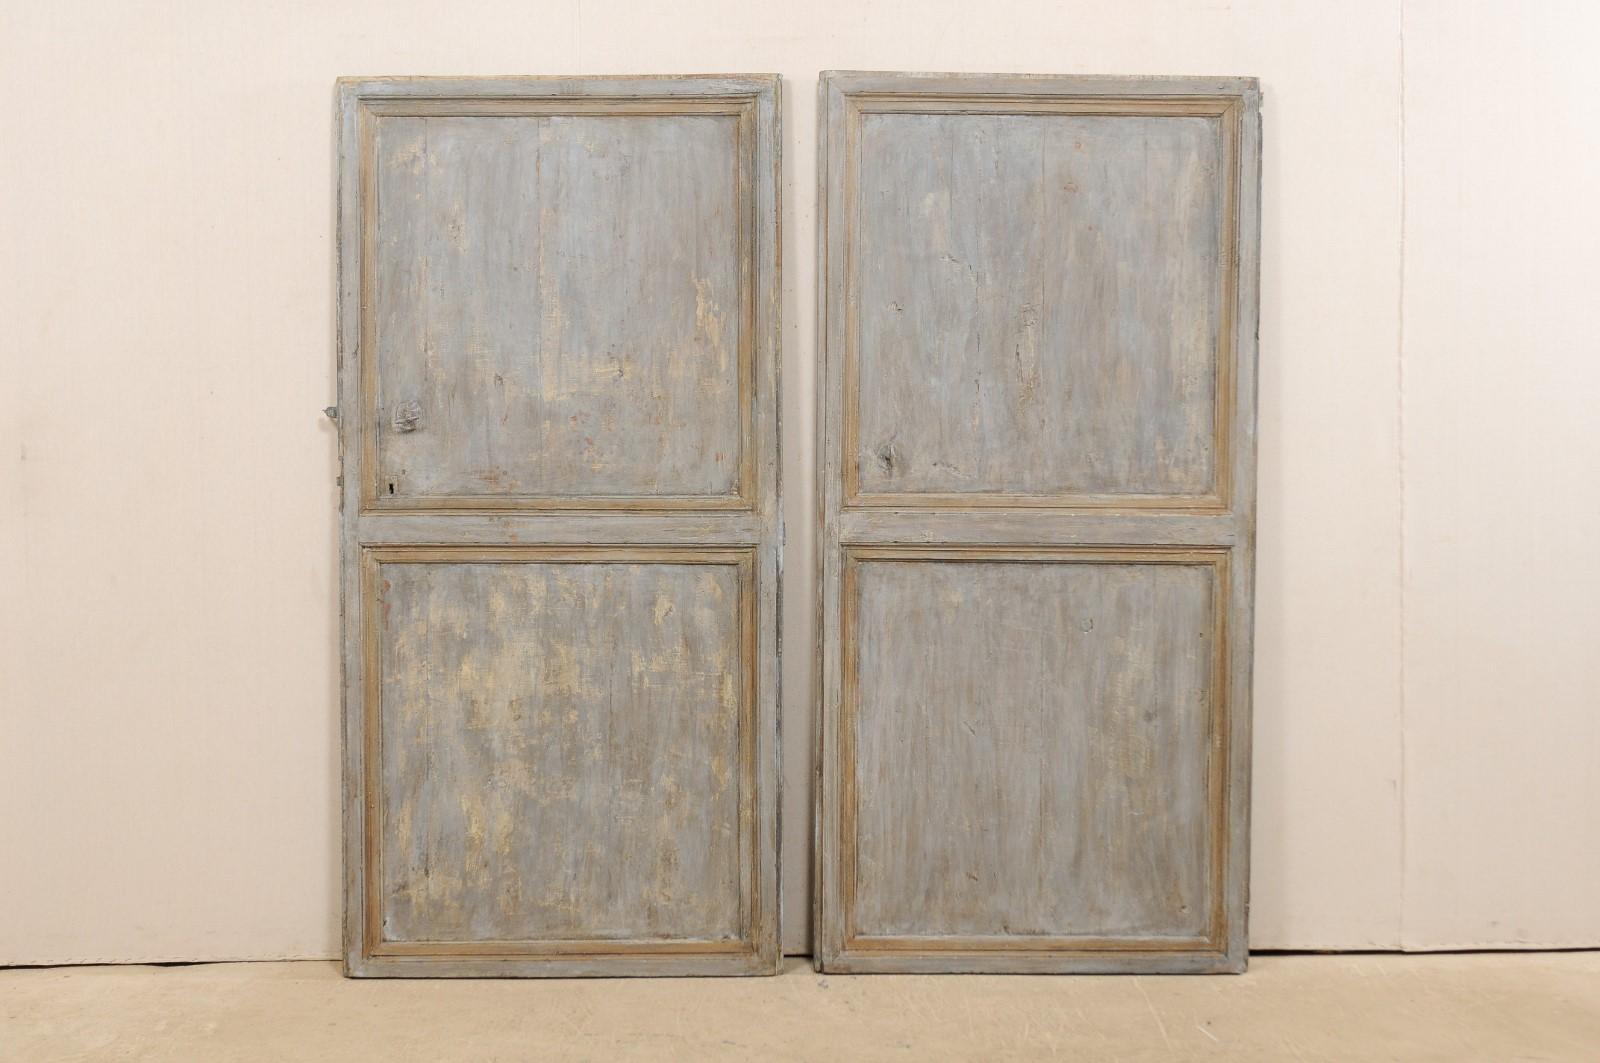 A set of 2 Spanish doors, both singles, from the 19th century. This pair of antique doors from Spain, are each adorned with a pair of recessed panels, square in shape, one topping the other, and divided with a raised framed molding between them. The